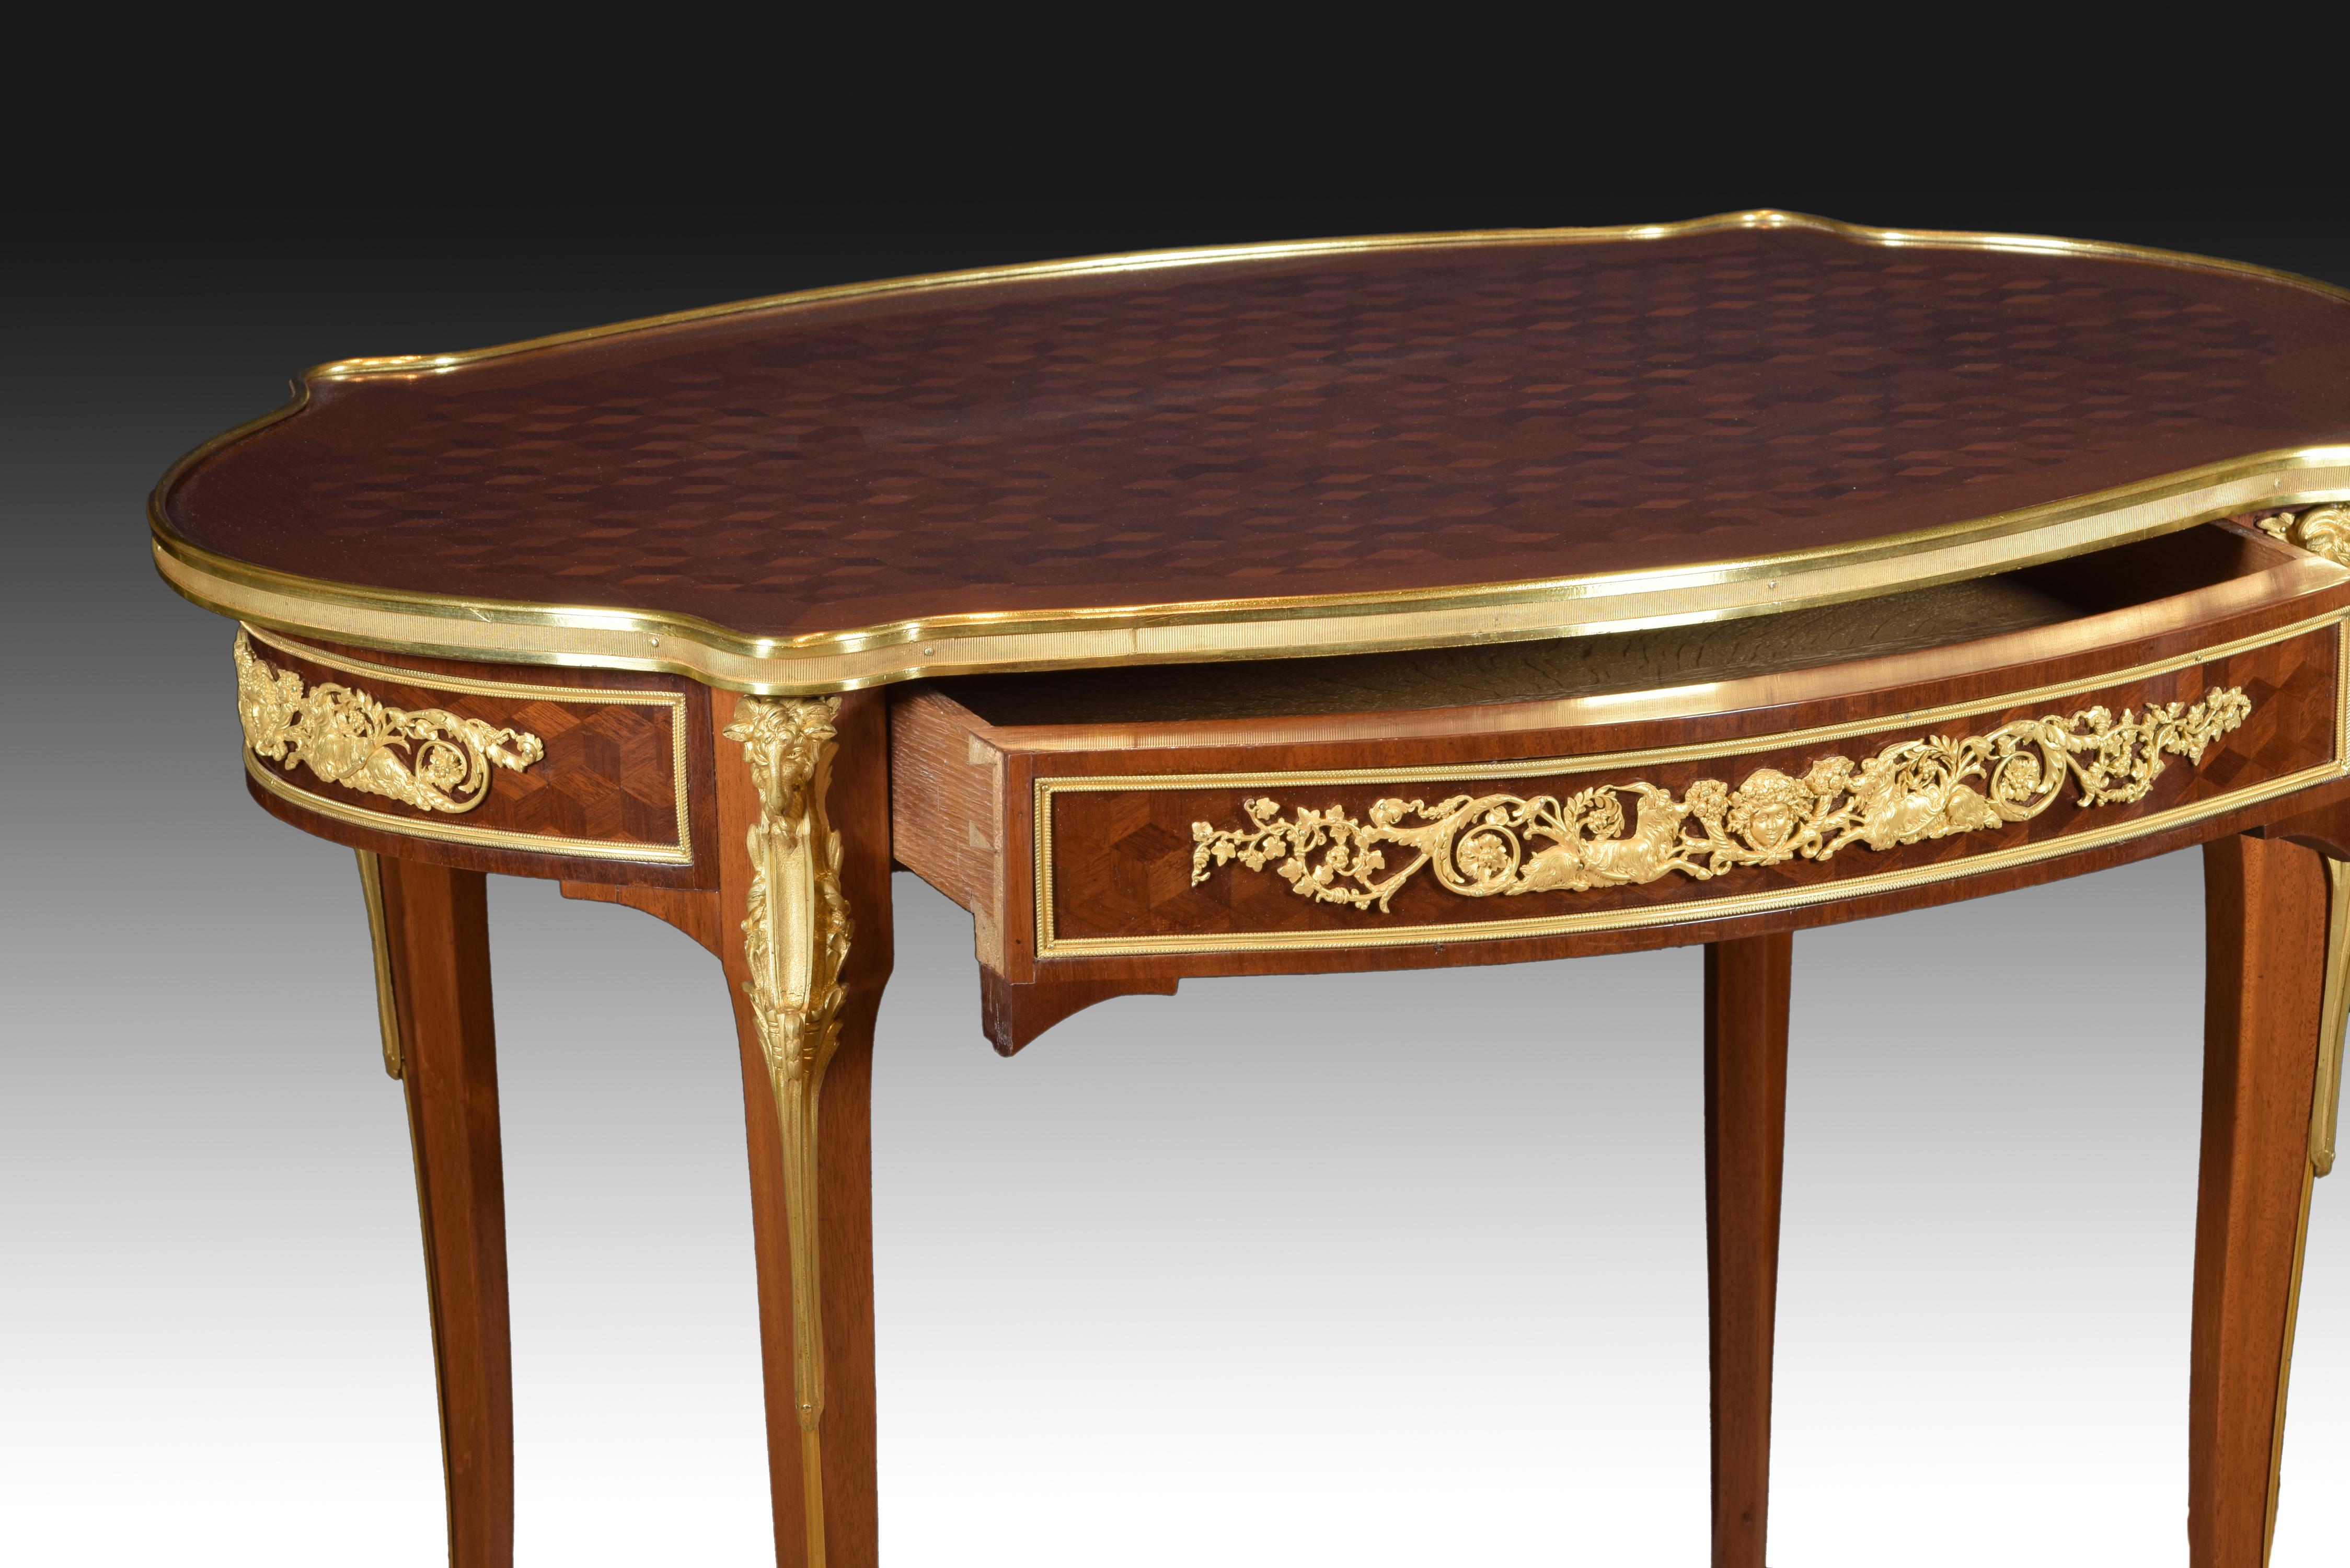 Louis XVI style table. Mahogany, gilt bronze. After models form Adam Weisweiler, end 19th century.
In order to maintain the quality of the work, he was forced in France to maintain a specialization in the different workshops. Thus, there were